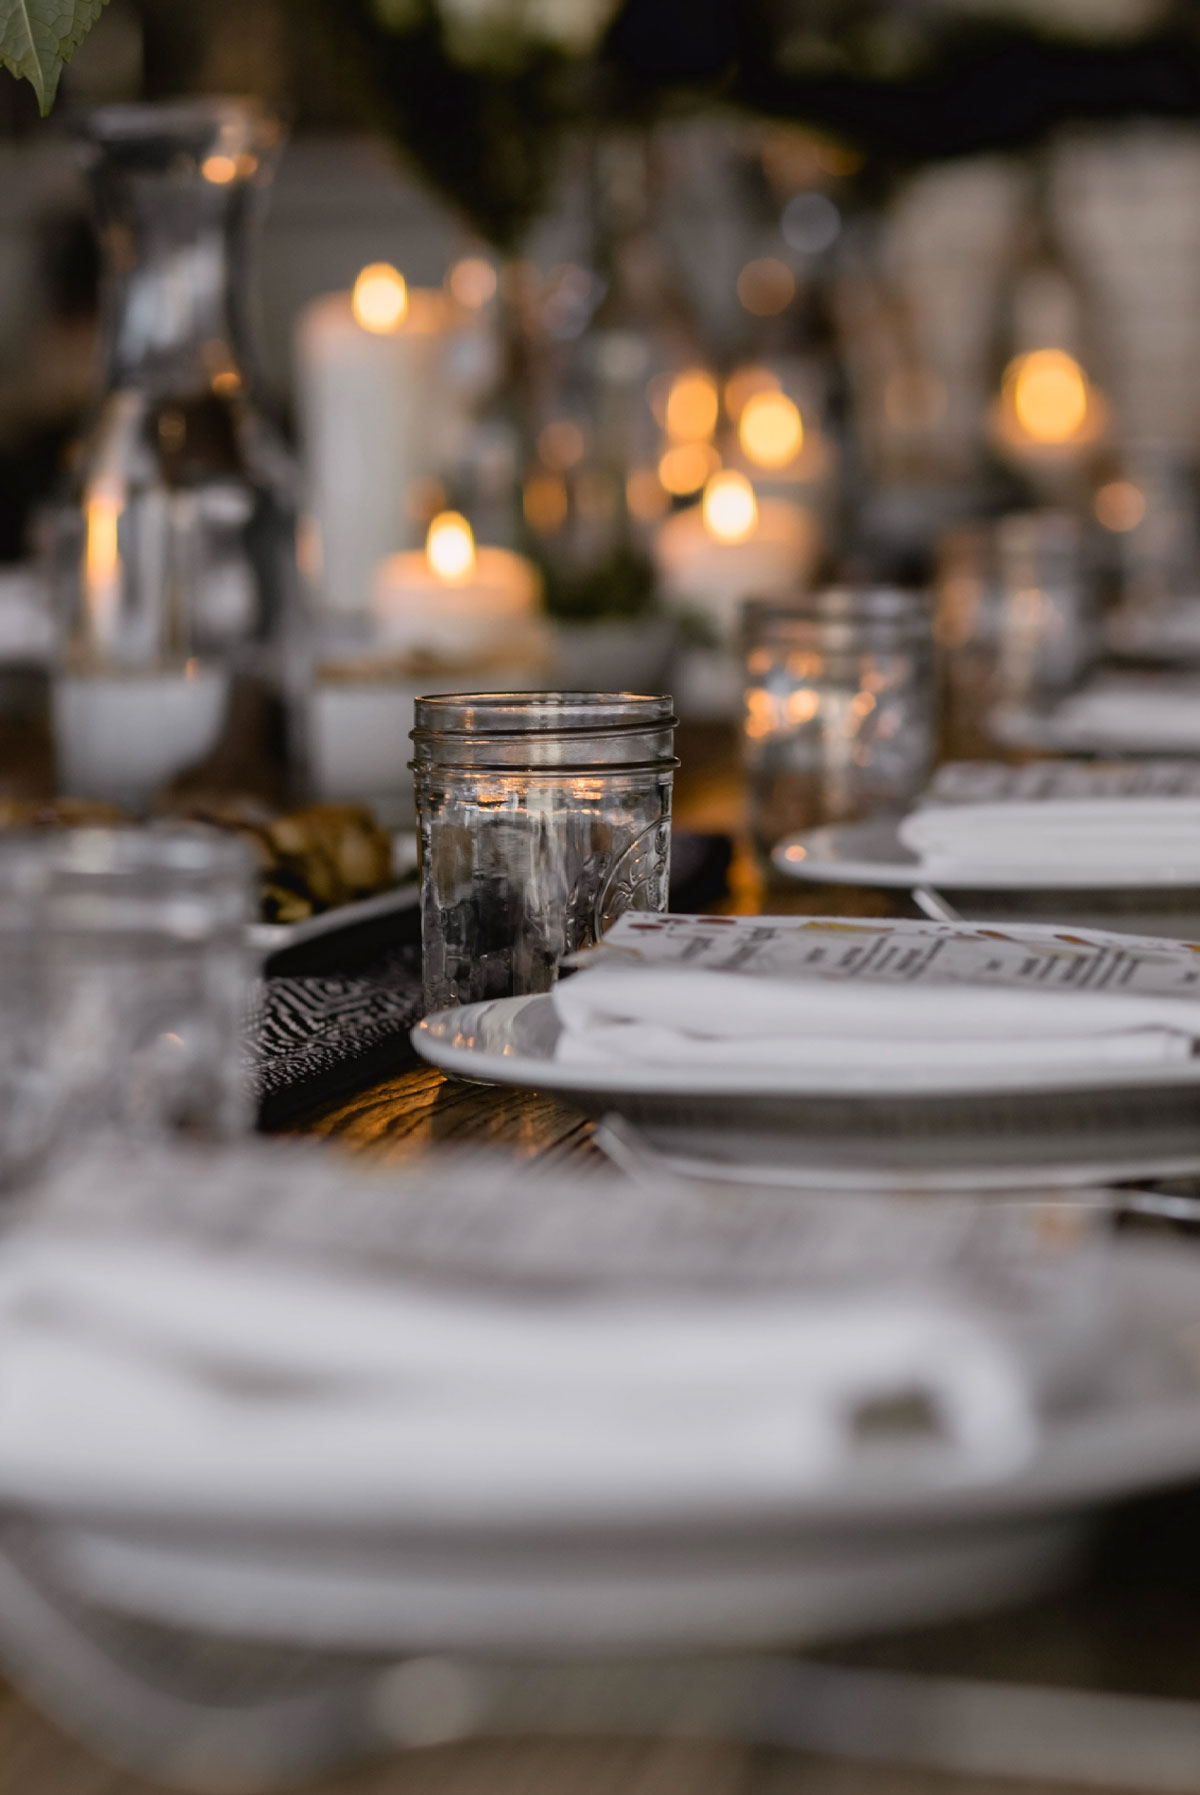 Planning an event and ready to share Fresno's best Italian with your guests? We'll host your party on our gorgeous patio, or bring the party to you with a catering package! Pictured: a place setting at a long buffet table covered with crisp white linens. Candles glow in the background.